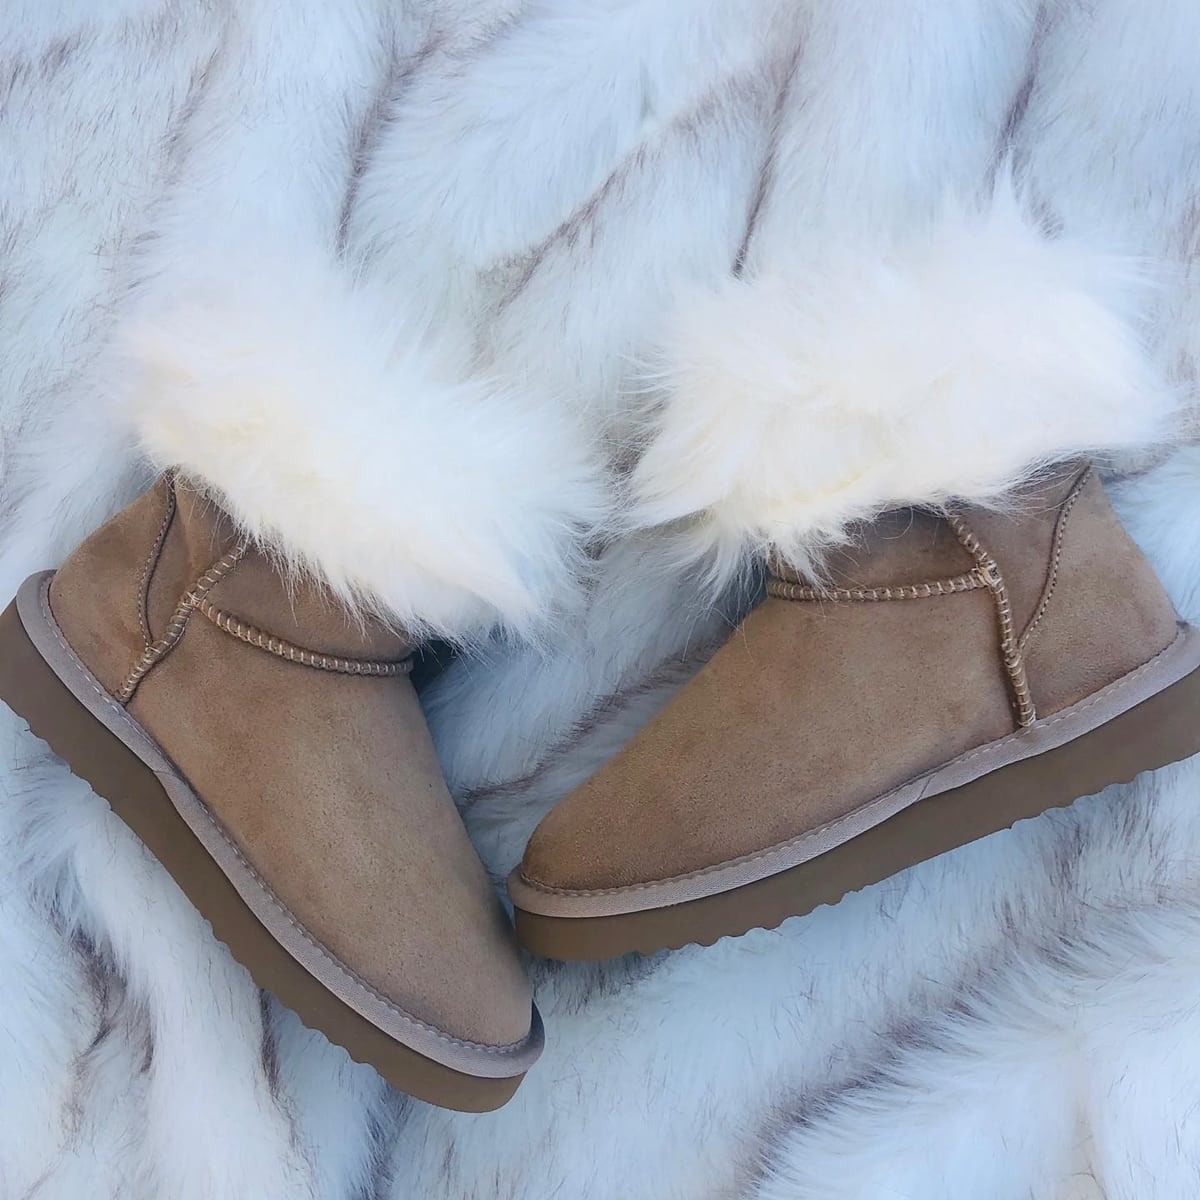 PAWJ California is a luxury cruelty-free brand that offers great alternatives to UGG sheepskin boots